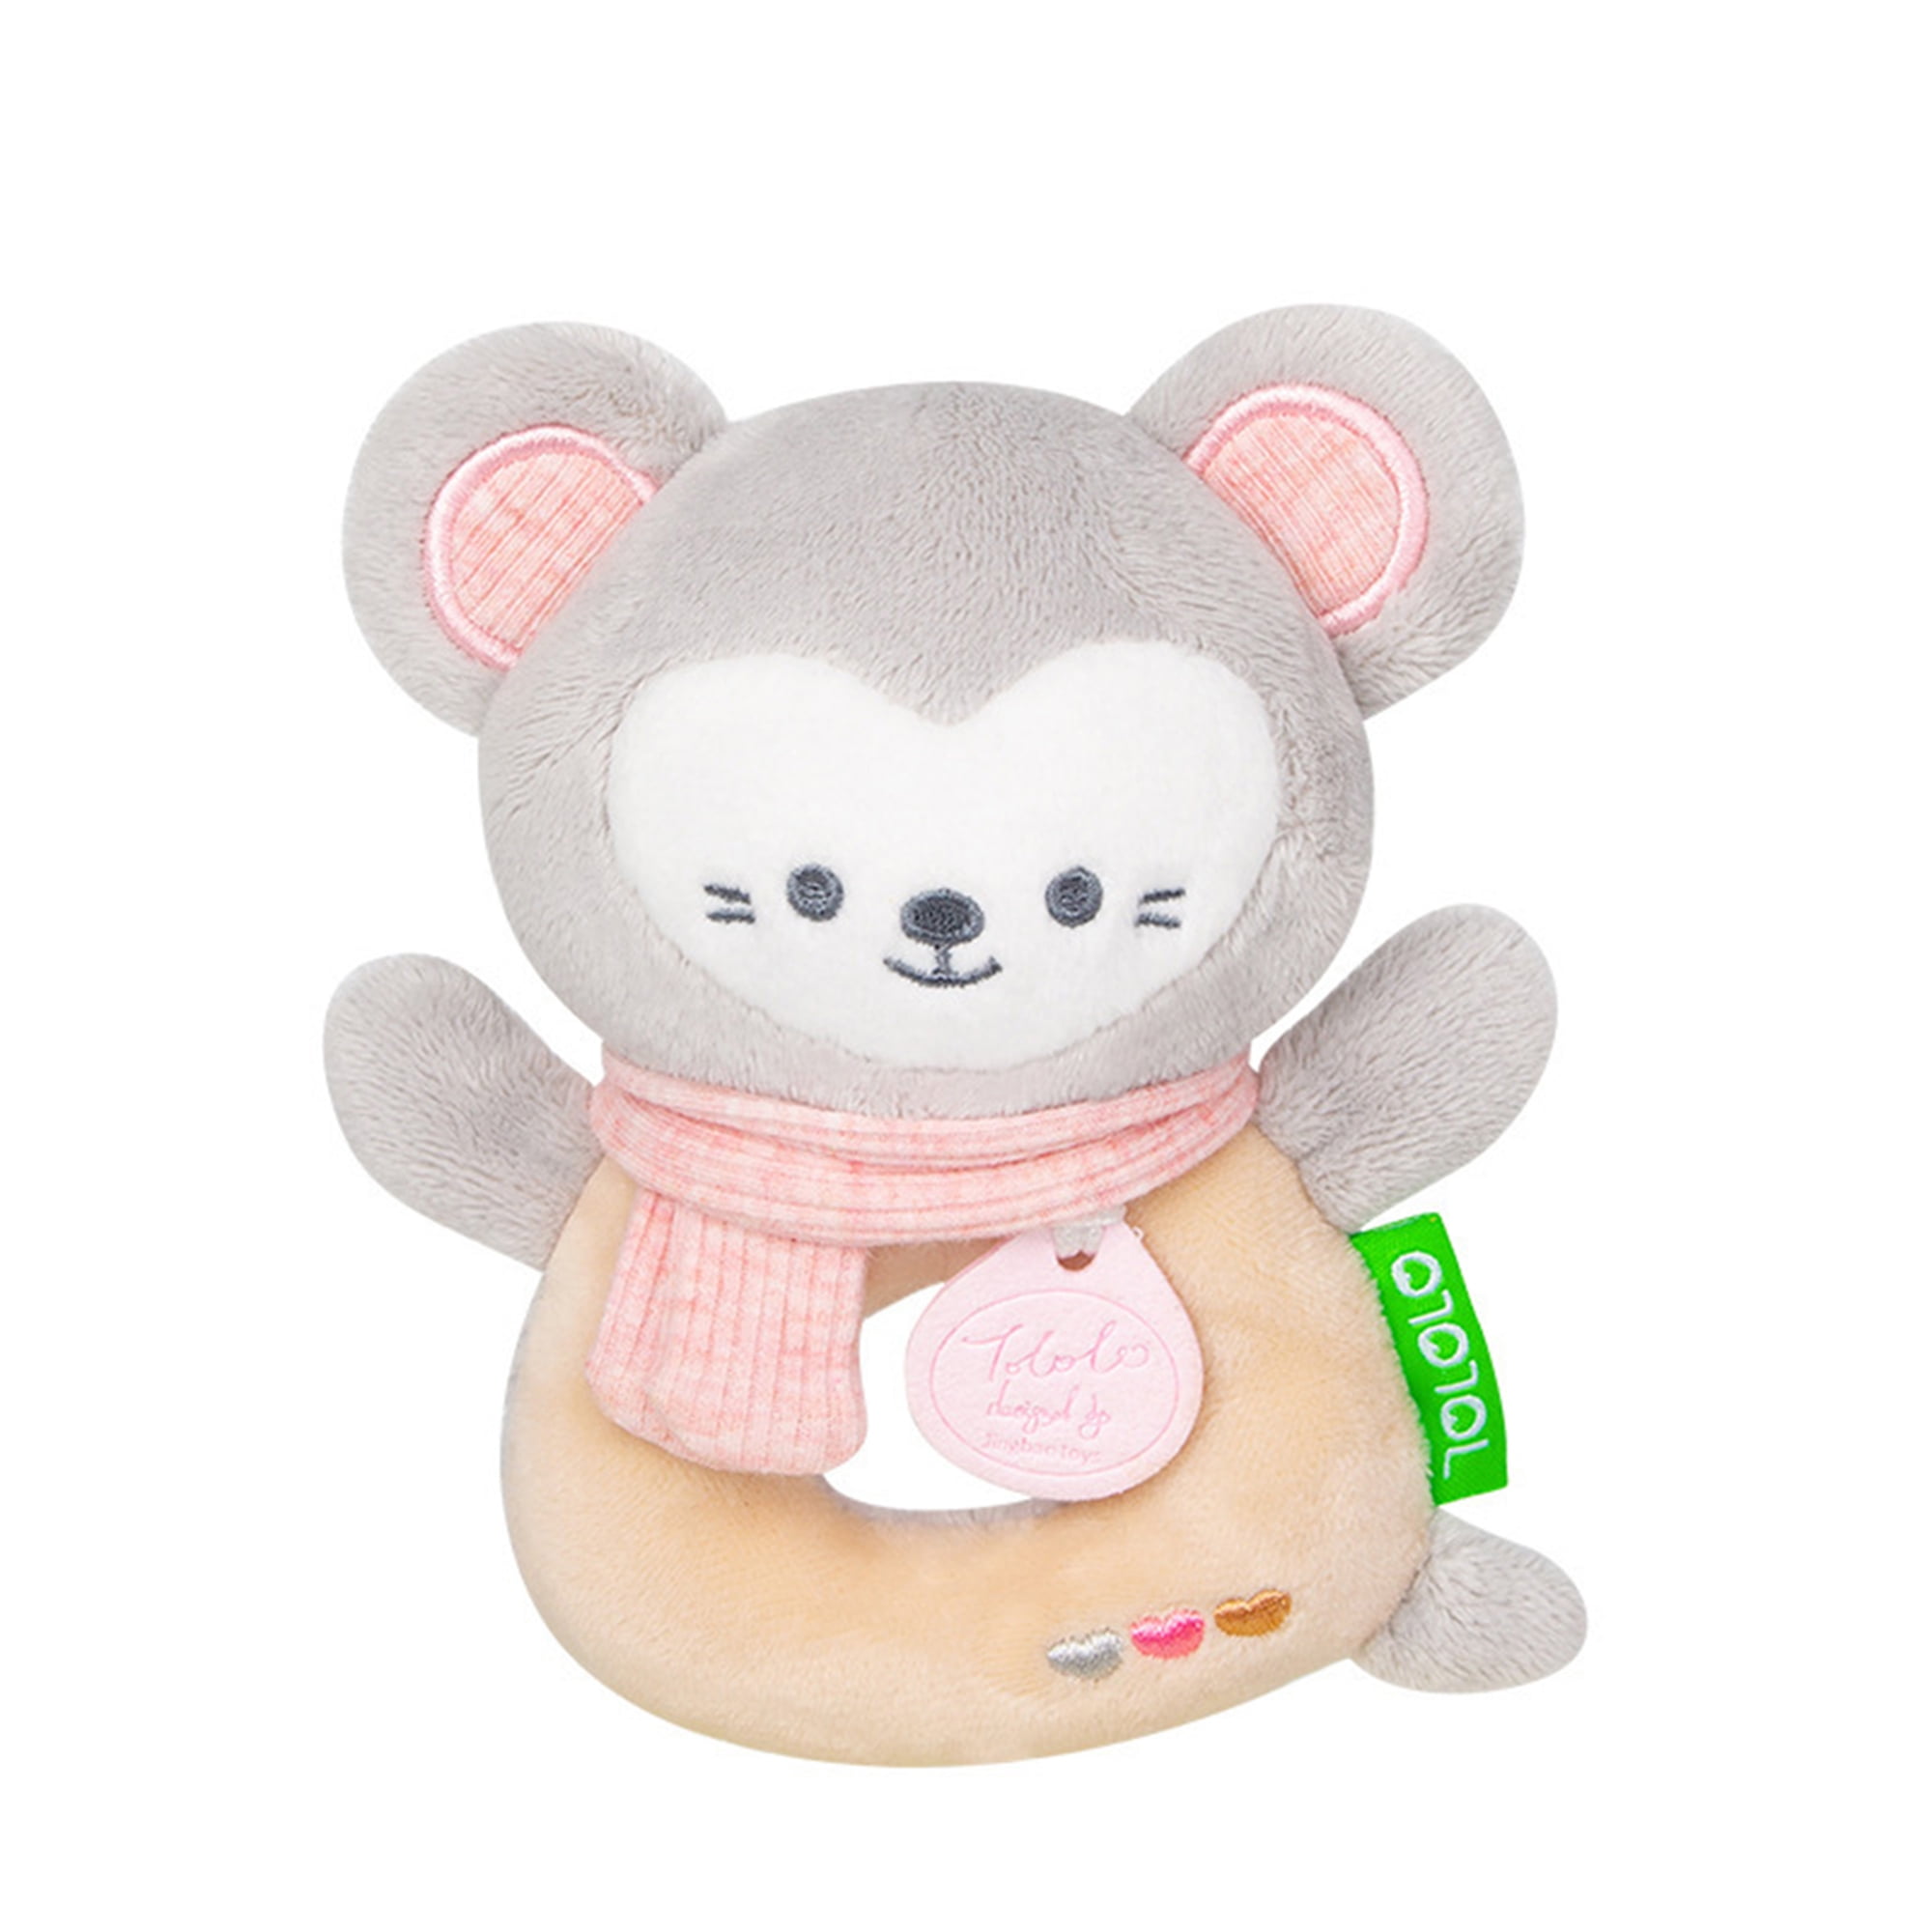 10" My First Baby Plush Teddy Bear with Internal Rattle for Newborn Babies Pink 